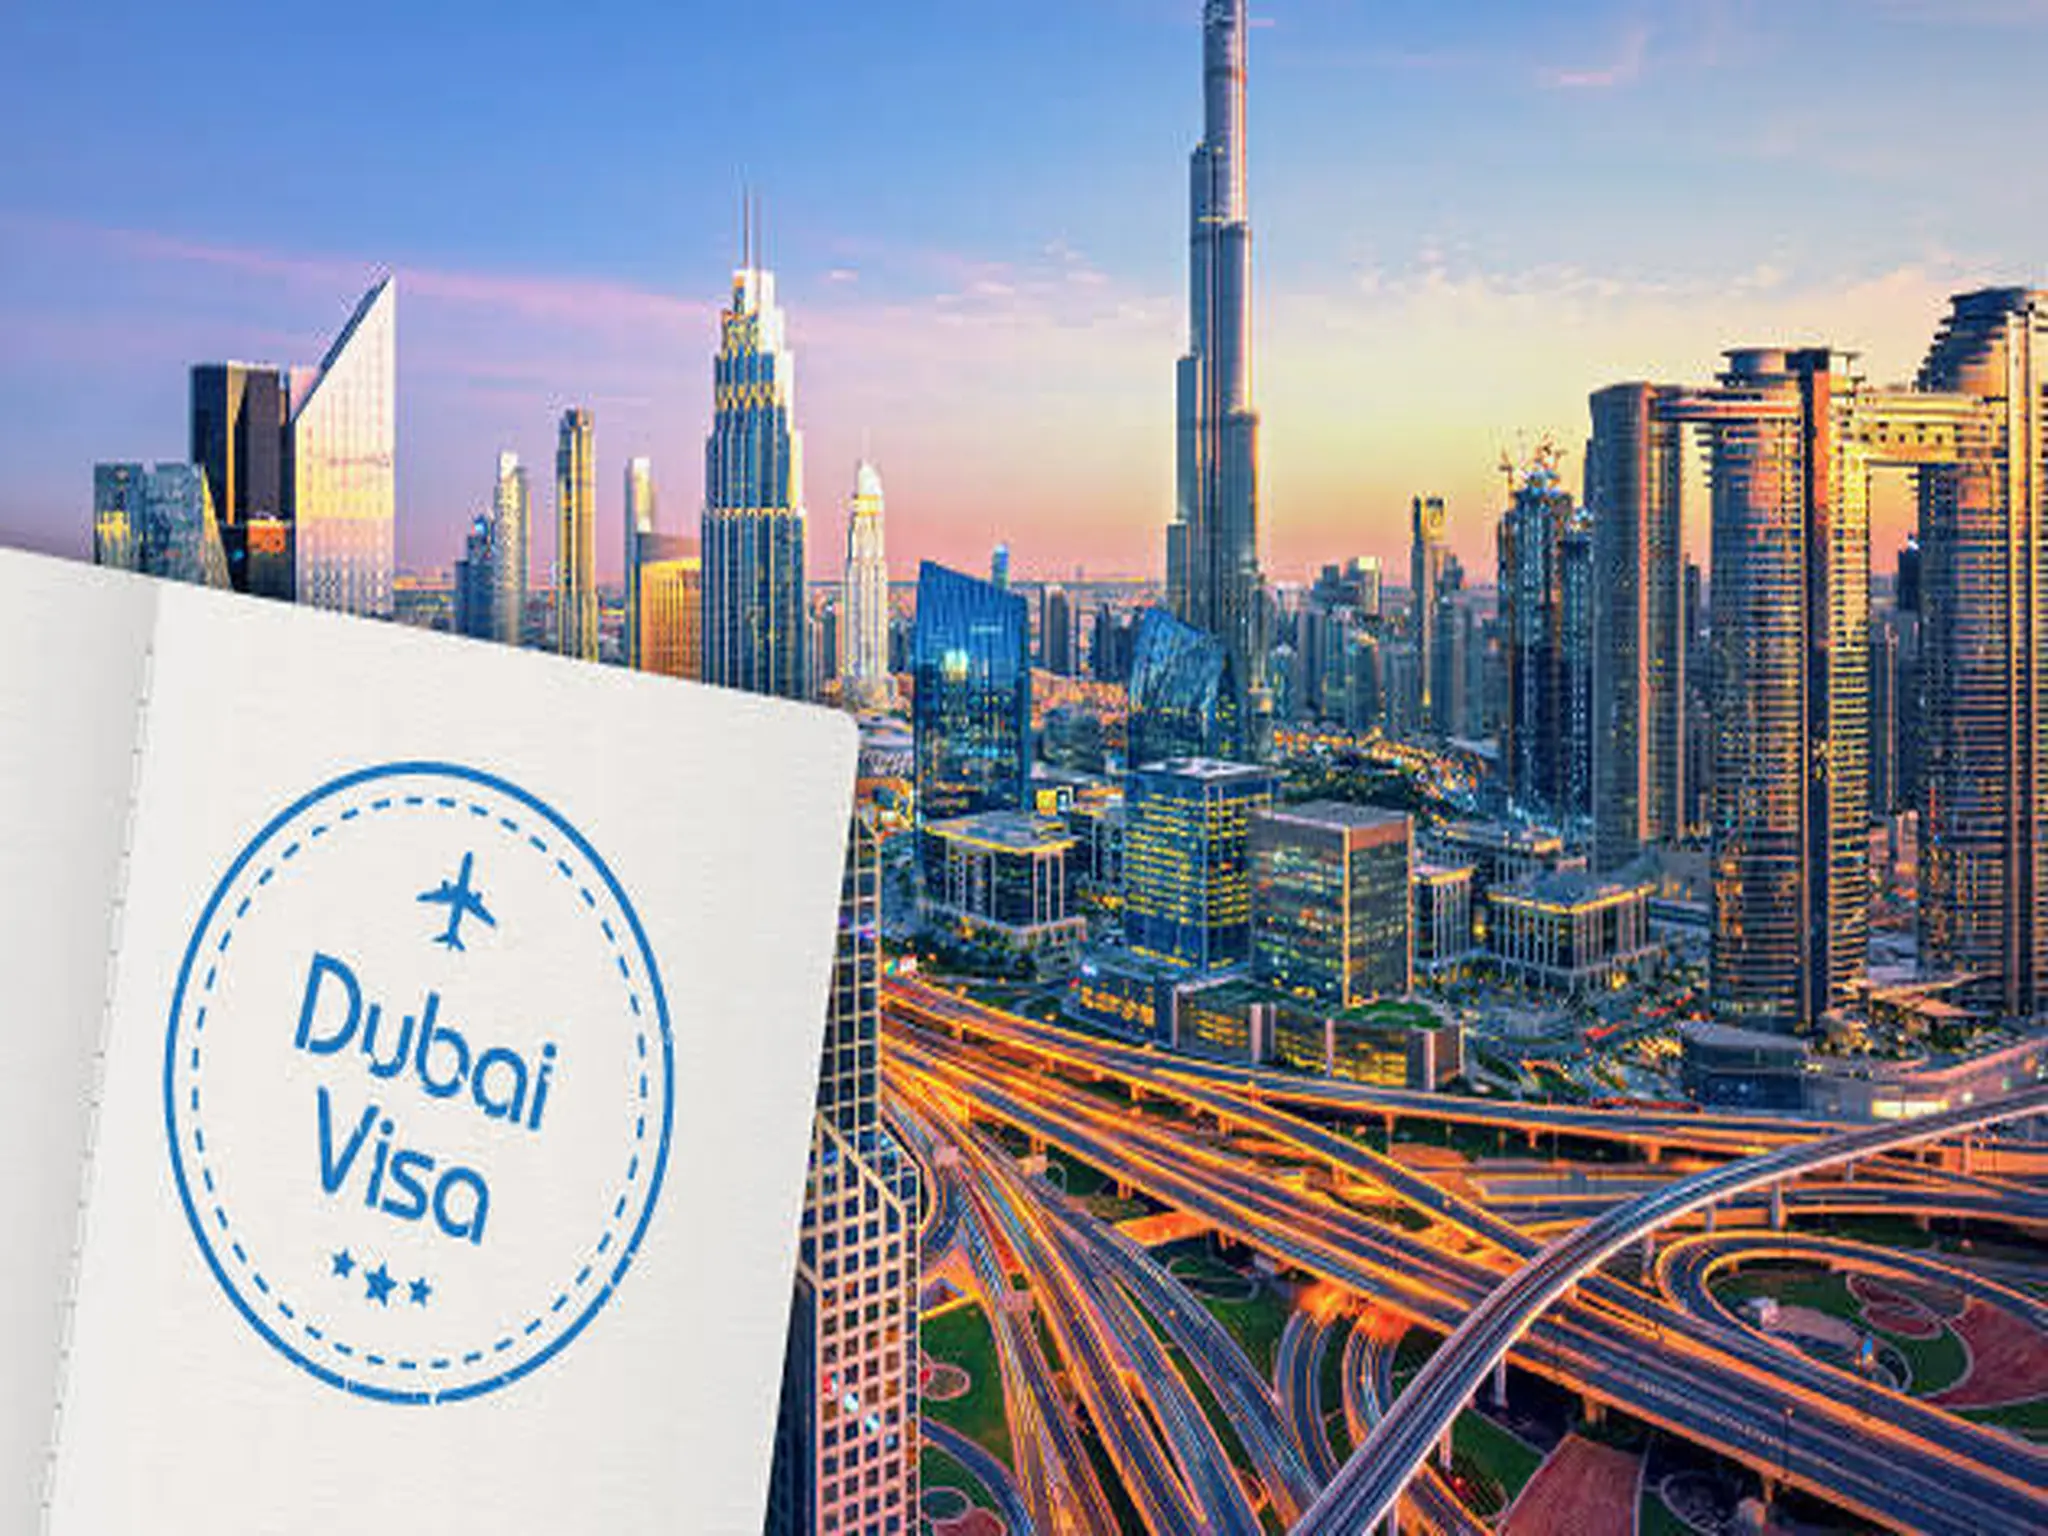 How much is Dubai visa for 2 years Now